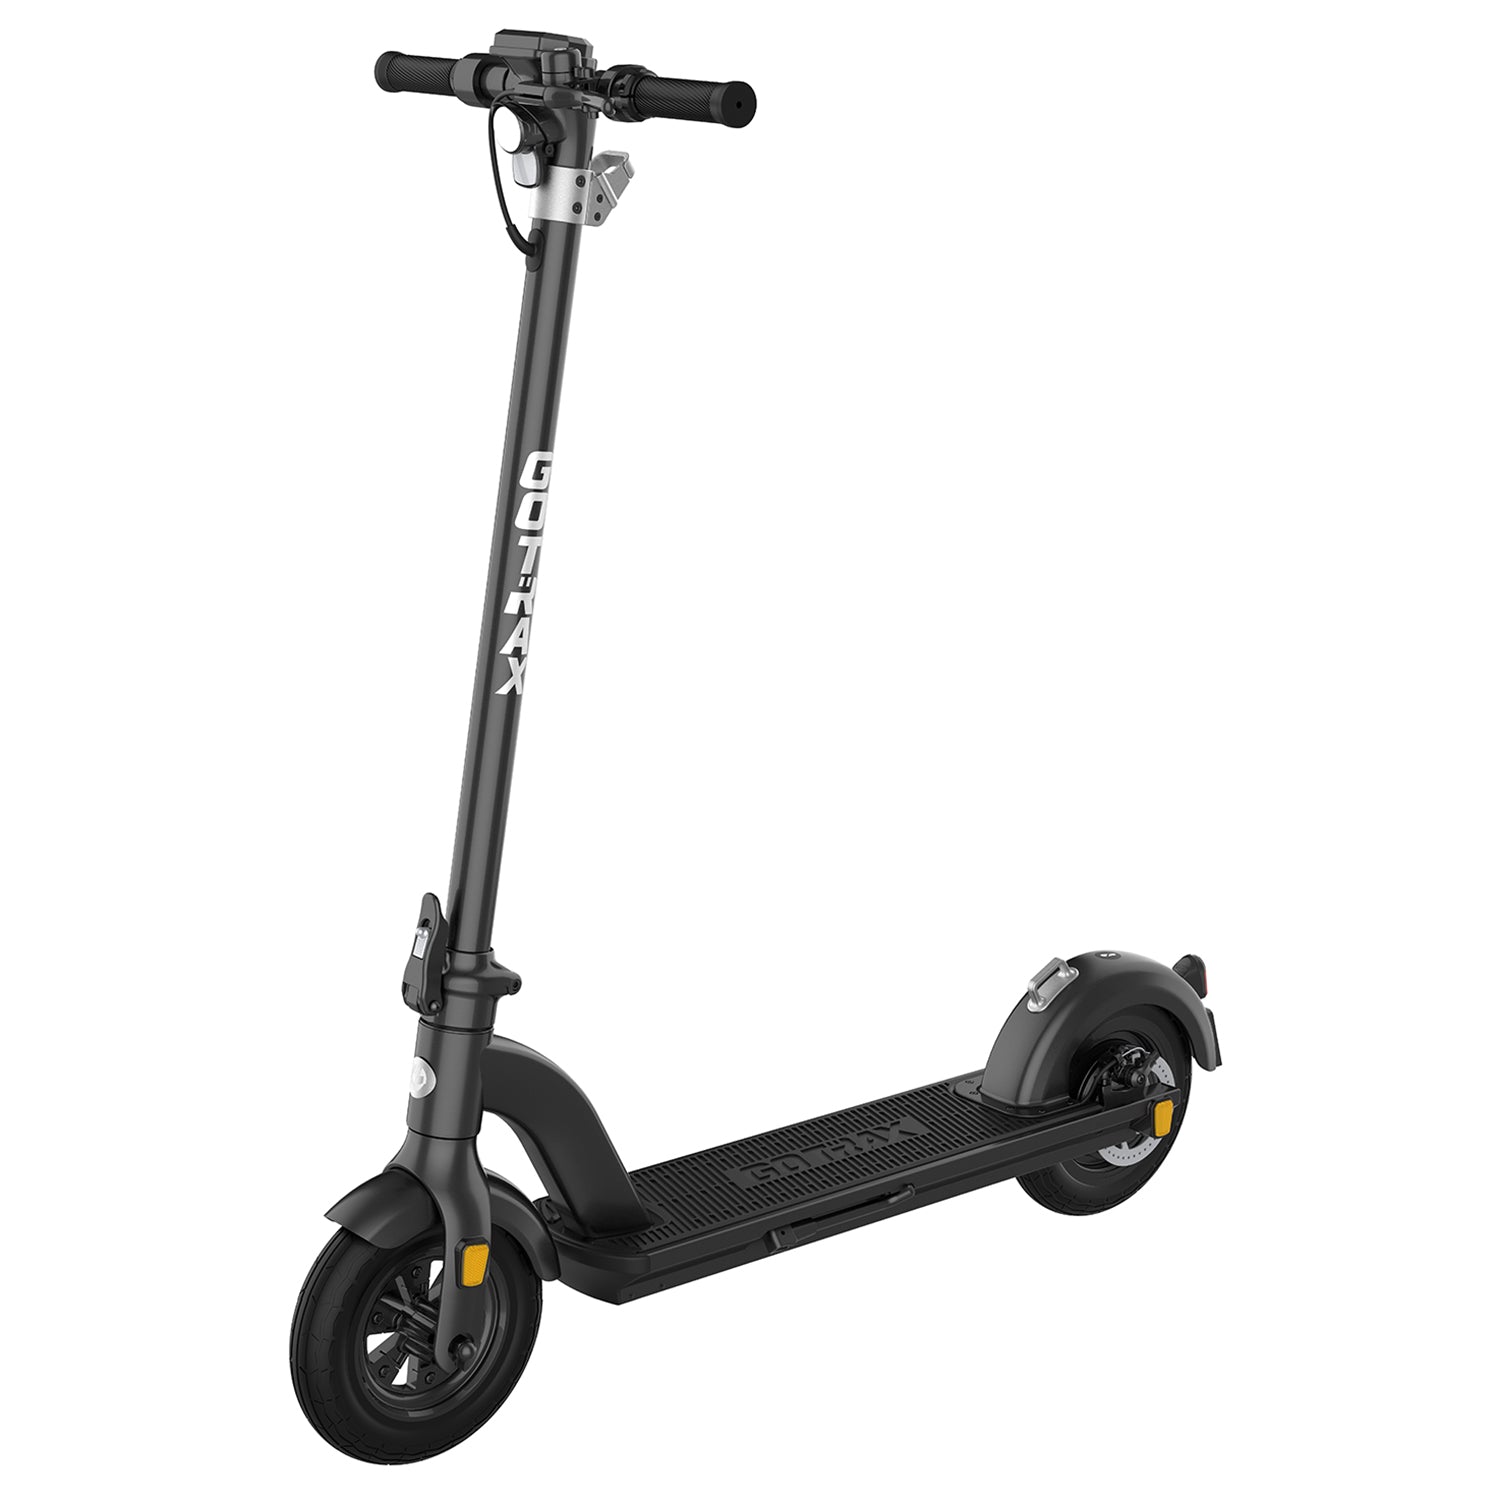 Refurbished Tour XP Electric Scooter - GOTRAX